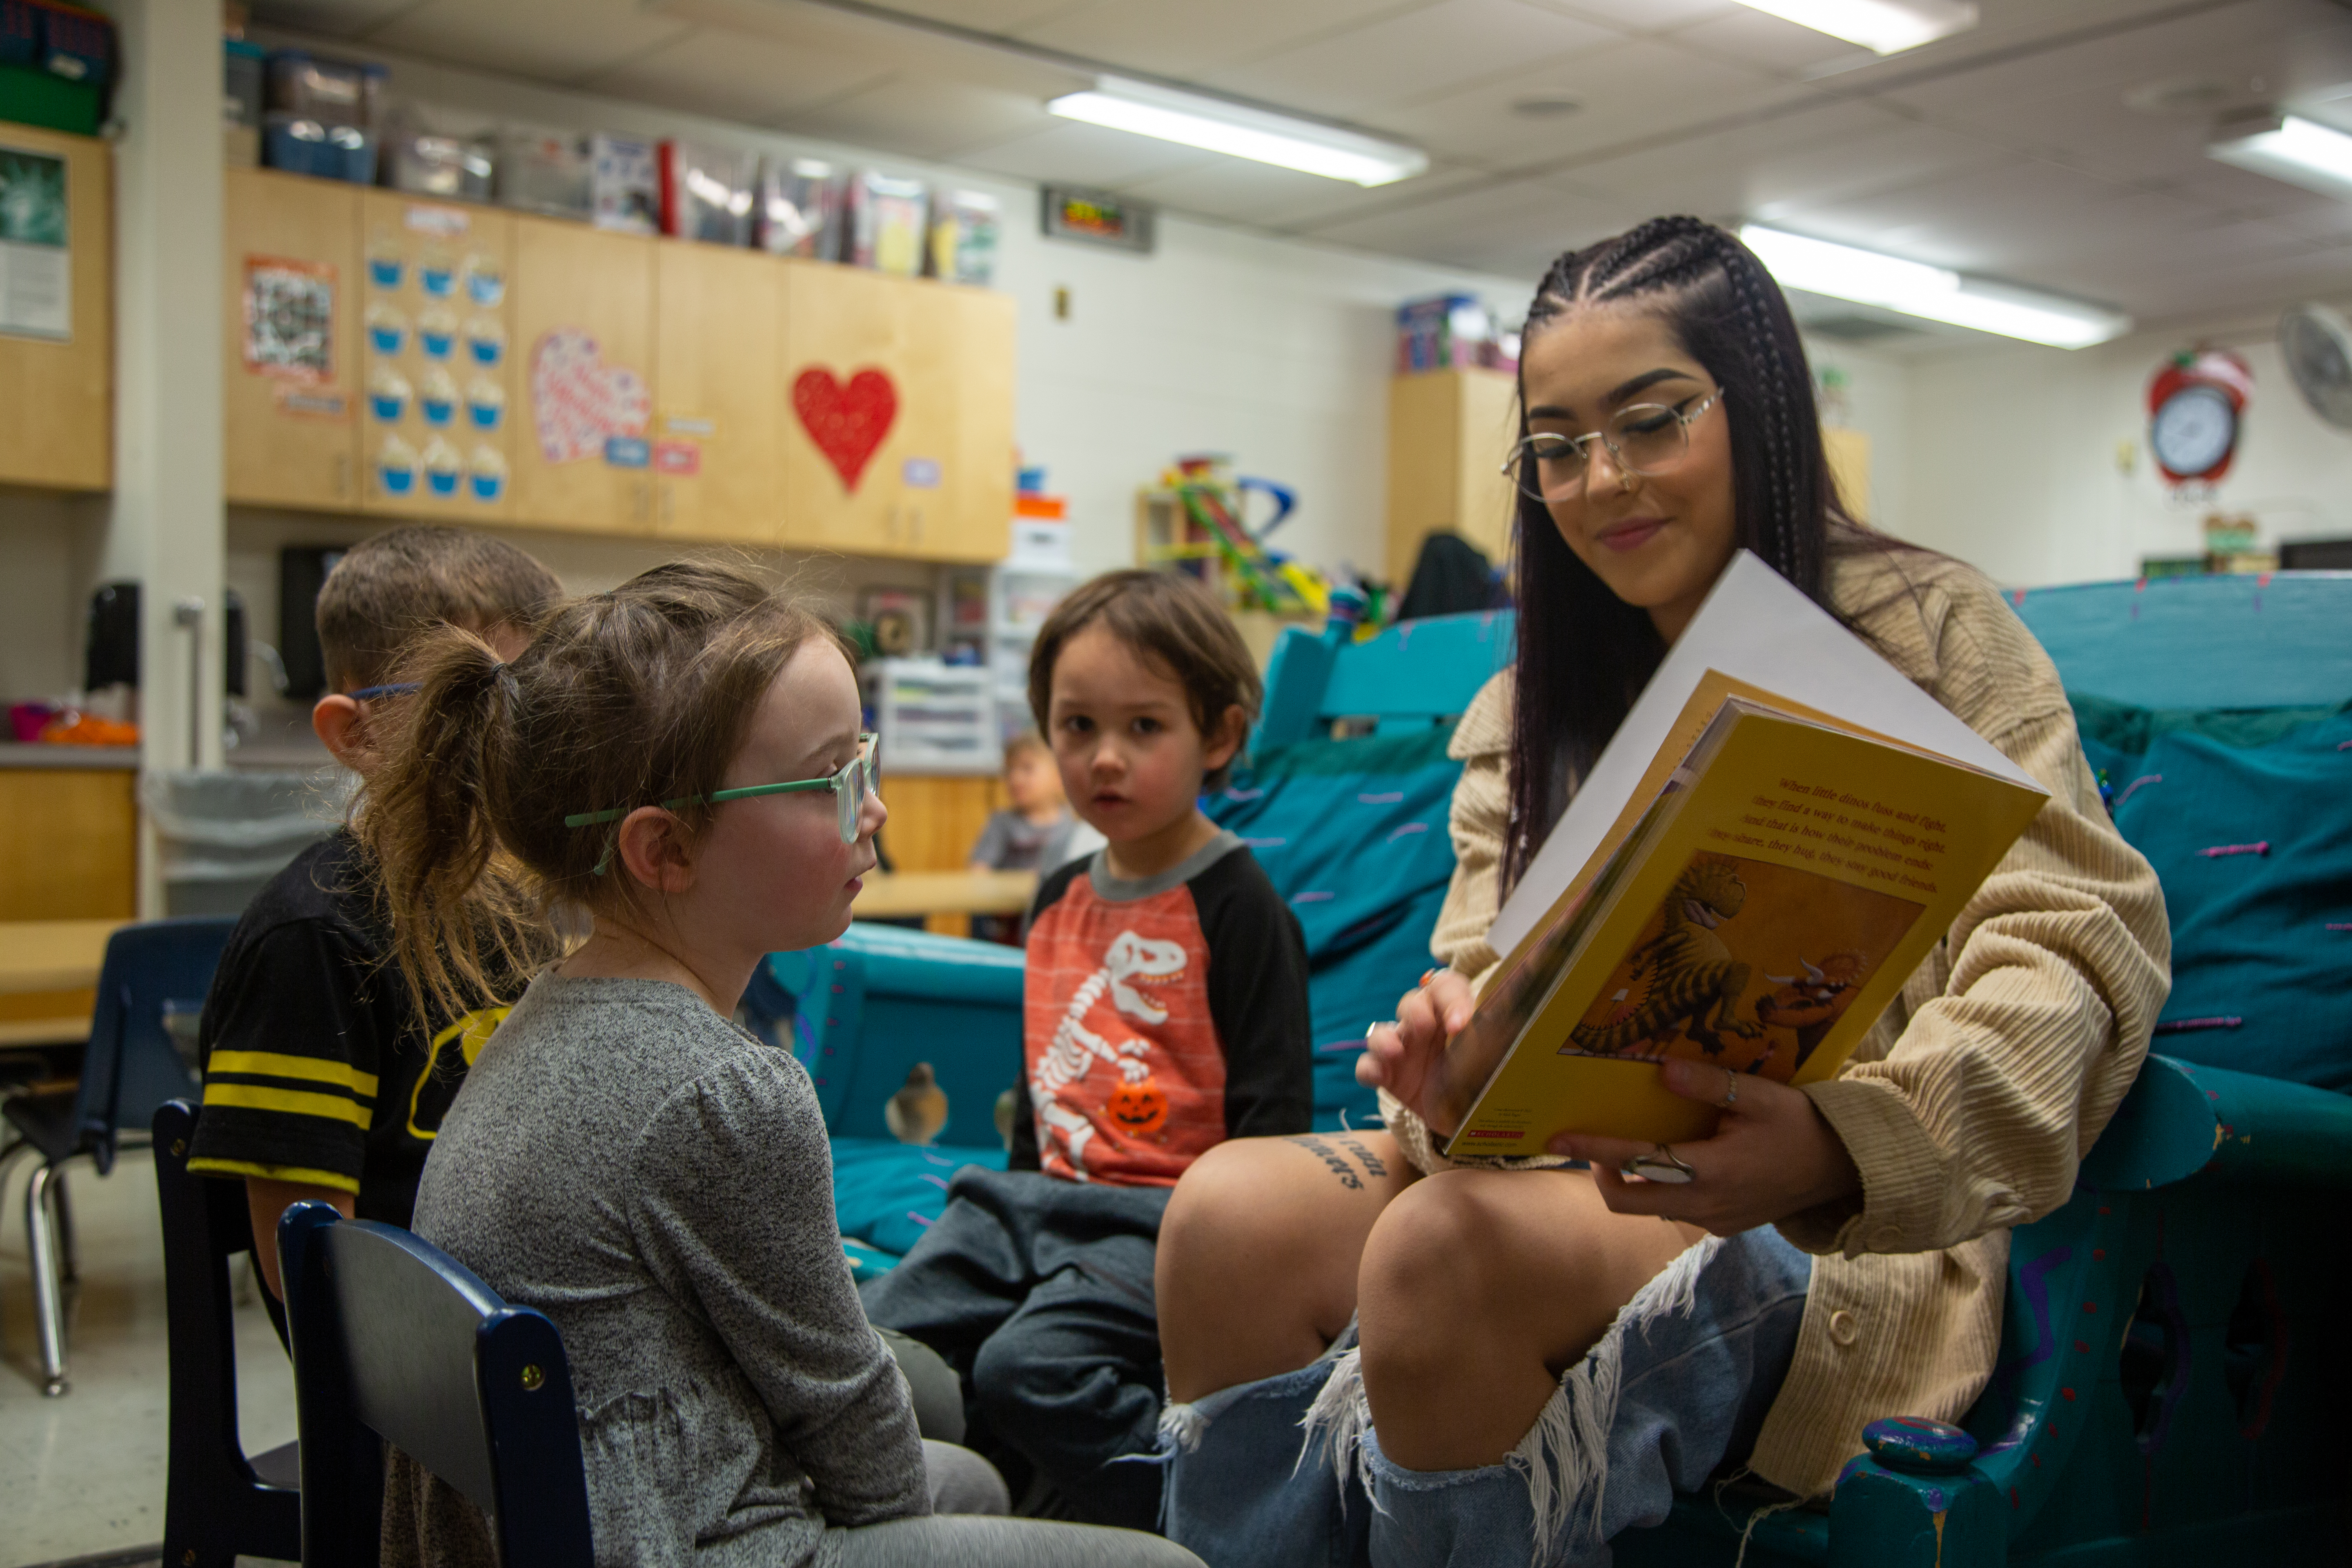 A high student reads to younger students.